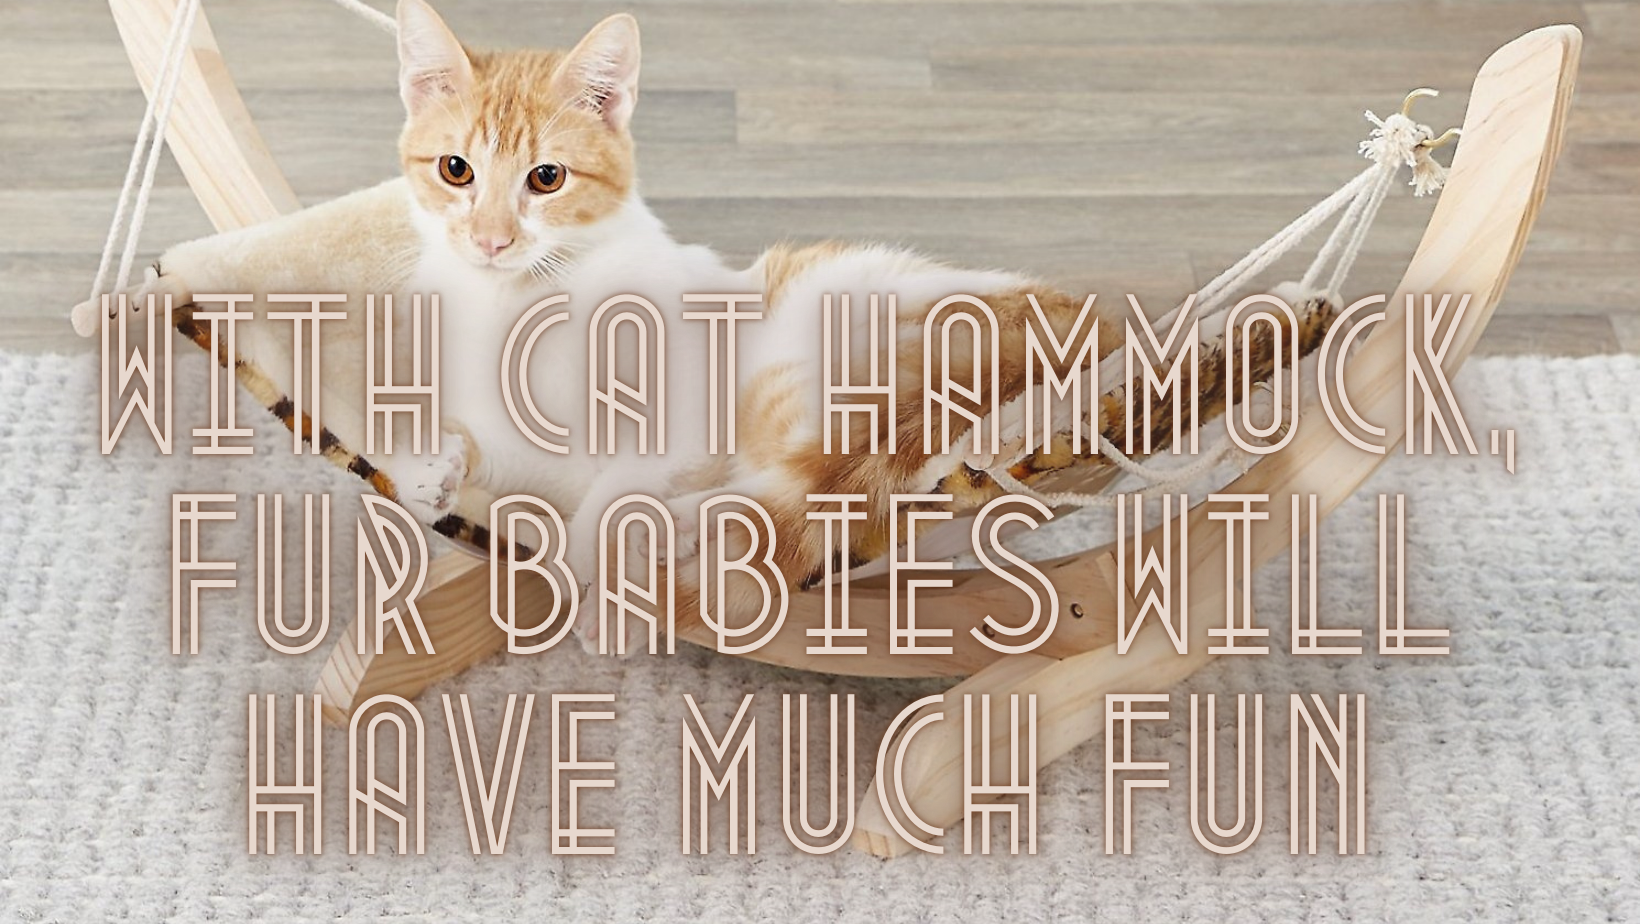 You are currently viewing With Cat Hammock, Fur Babies Will Have Much Fun